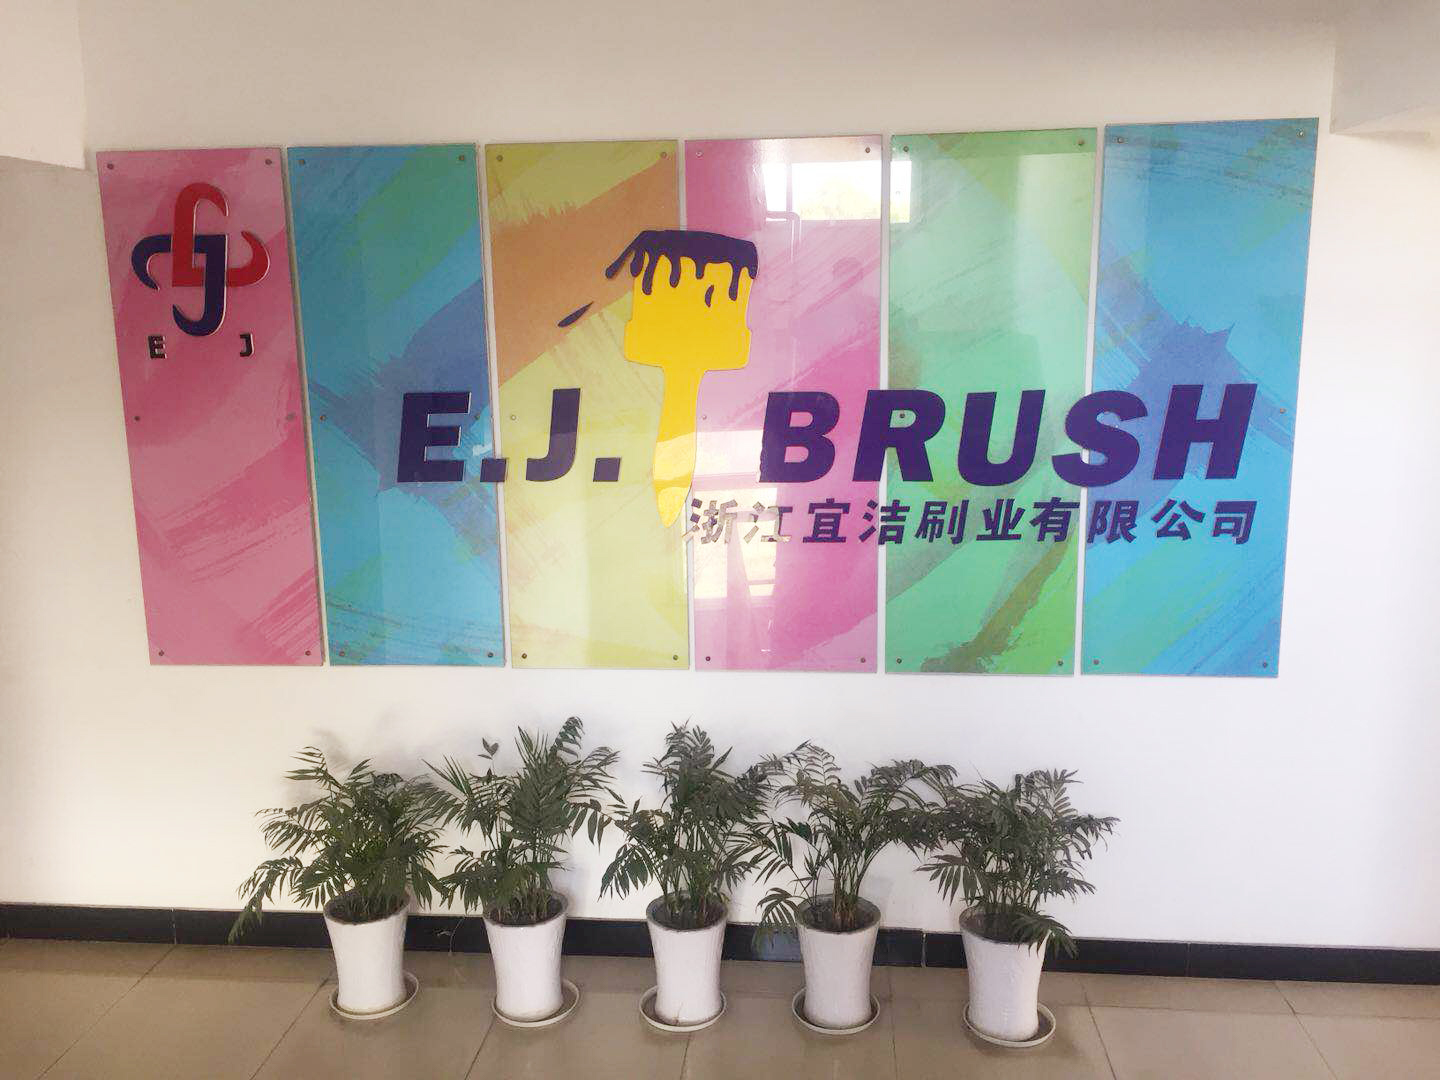 ZHEJIANG E.J.BRUSH IND CO.,LTD.was founded in 1992